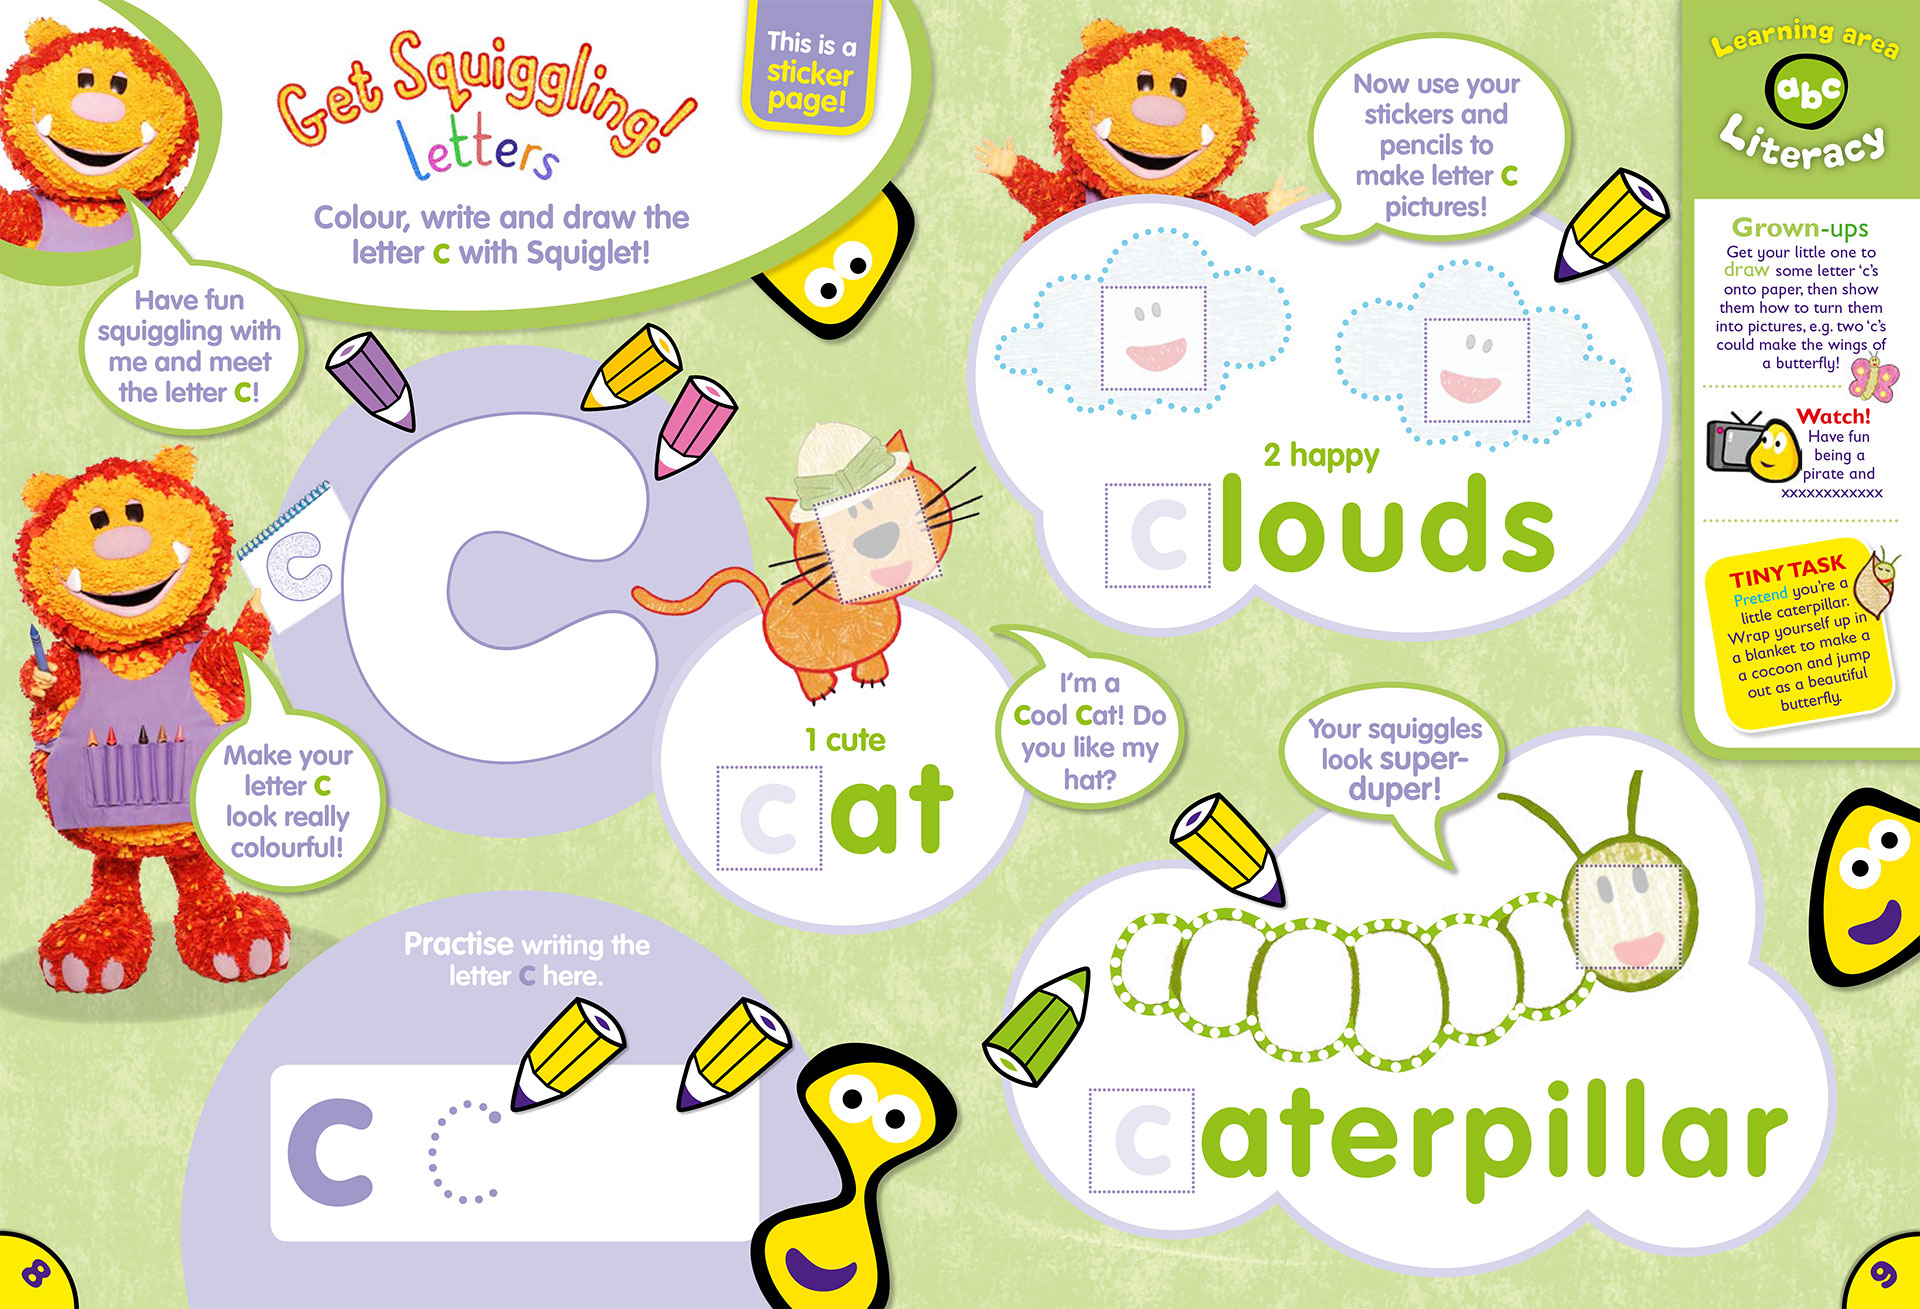 Get Squiggling Letters — Dot To Dot Productions